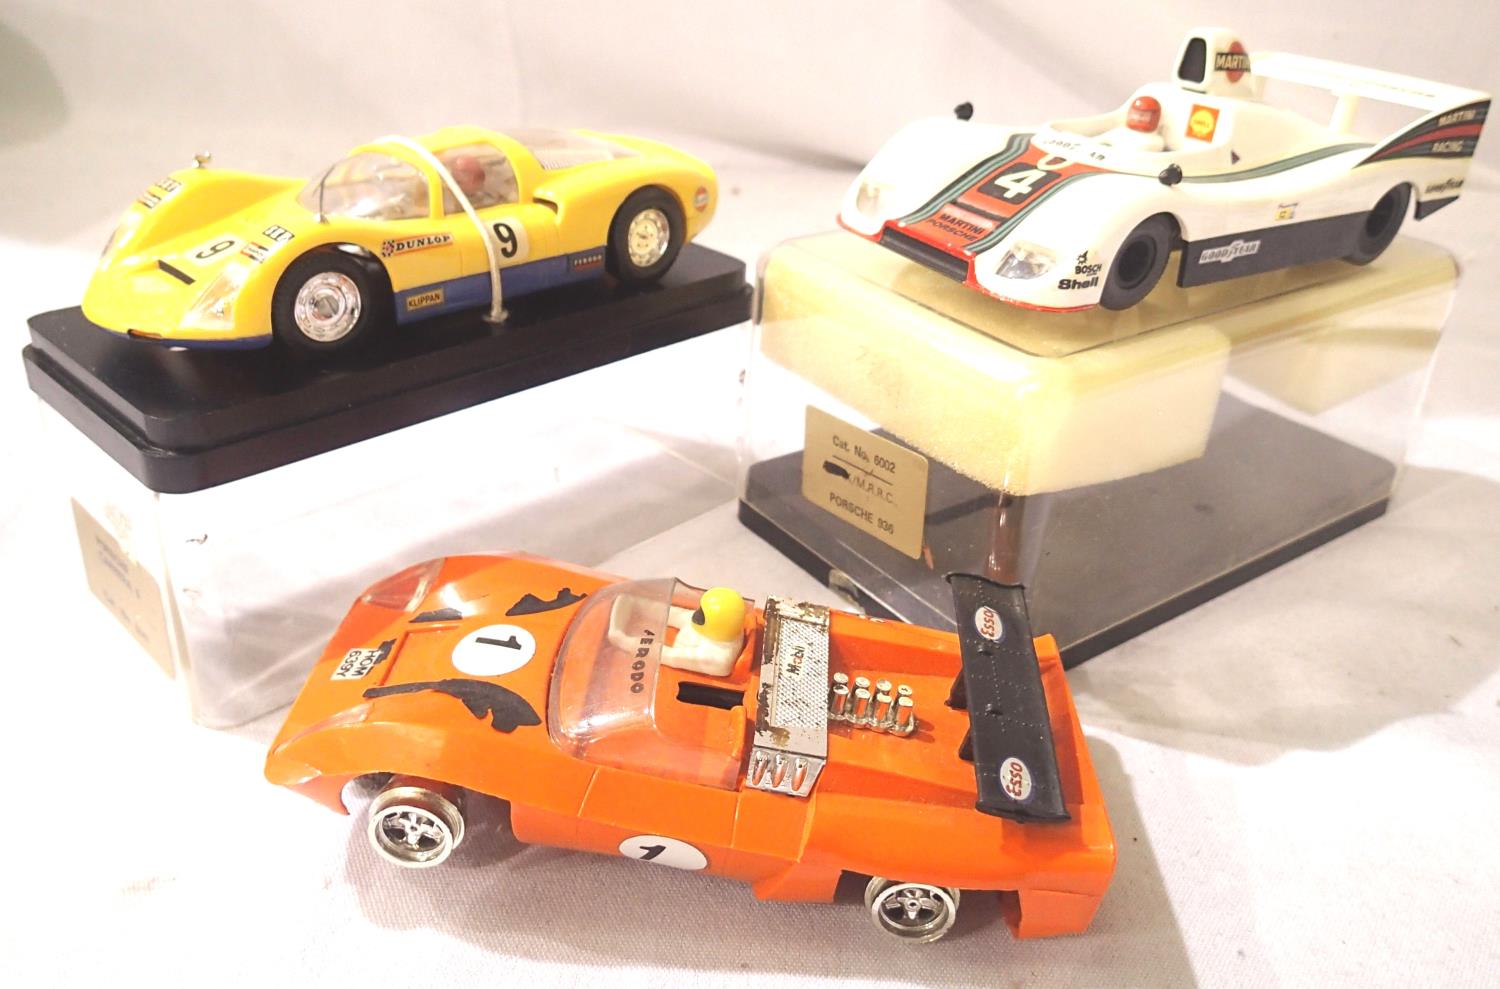 Two Airfix/MRRC slot cars, Porsche Carrera 6 and Porsche 936 both in very good condition and a